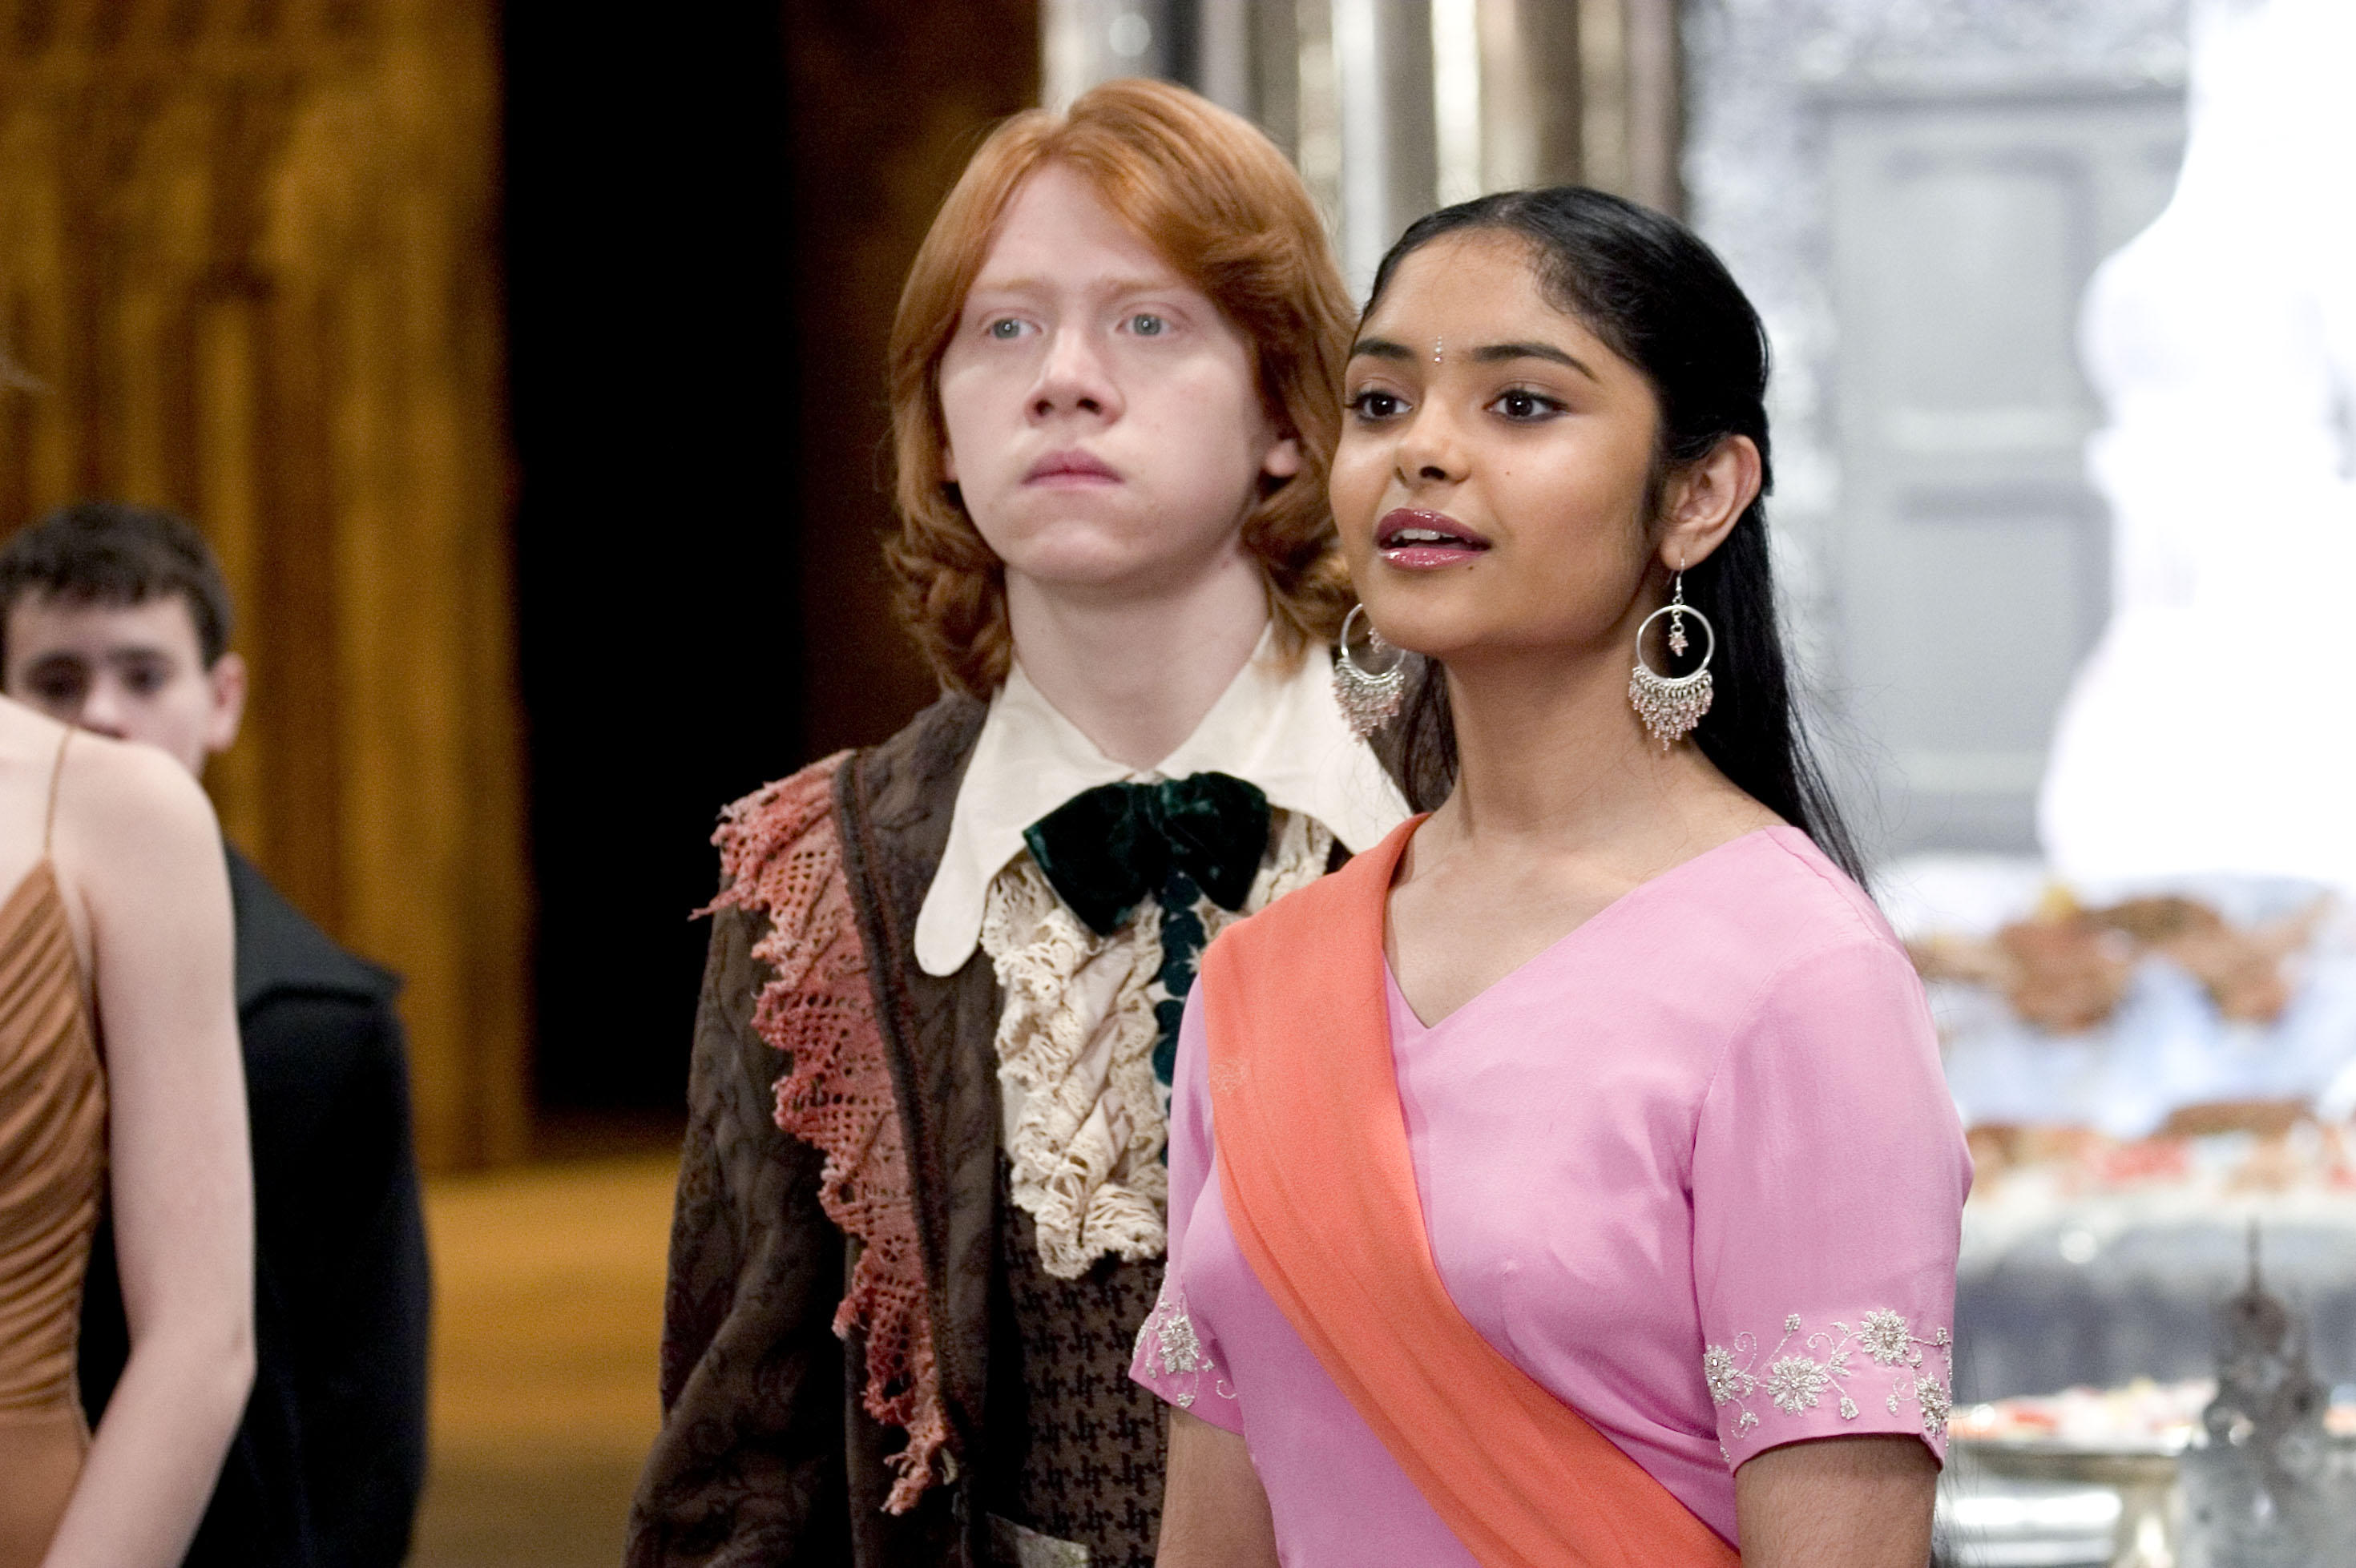 Afshan played Padma Patil in the hit films, based on the books by JK Rowling